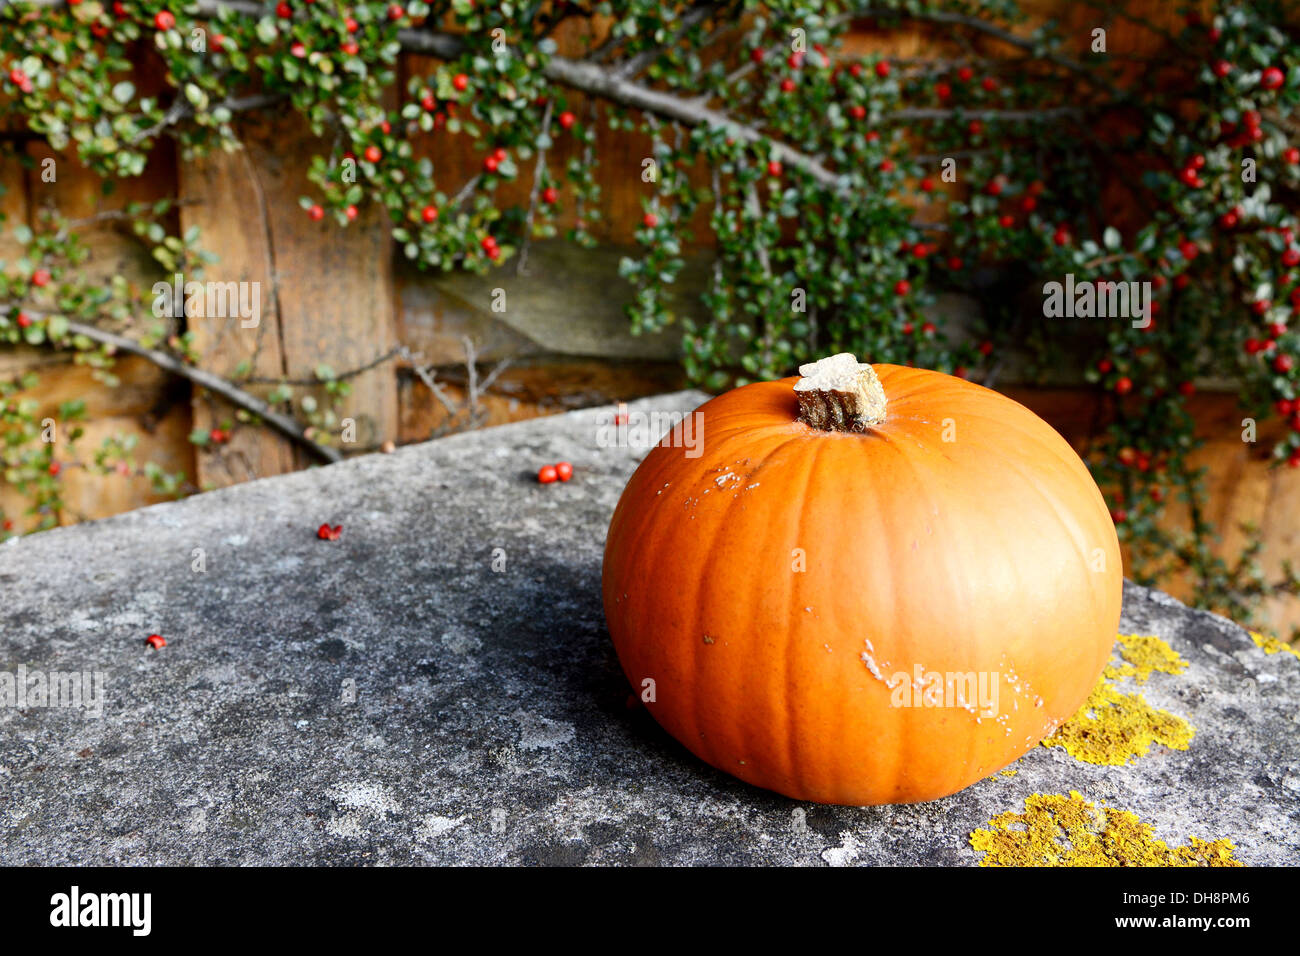 Orange pumpkin on lichen-covered stone bench in front of cotoneaster Stock Photo